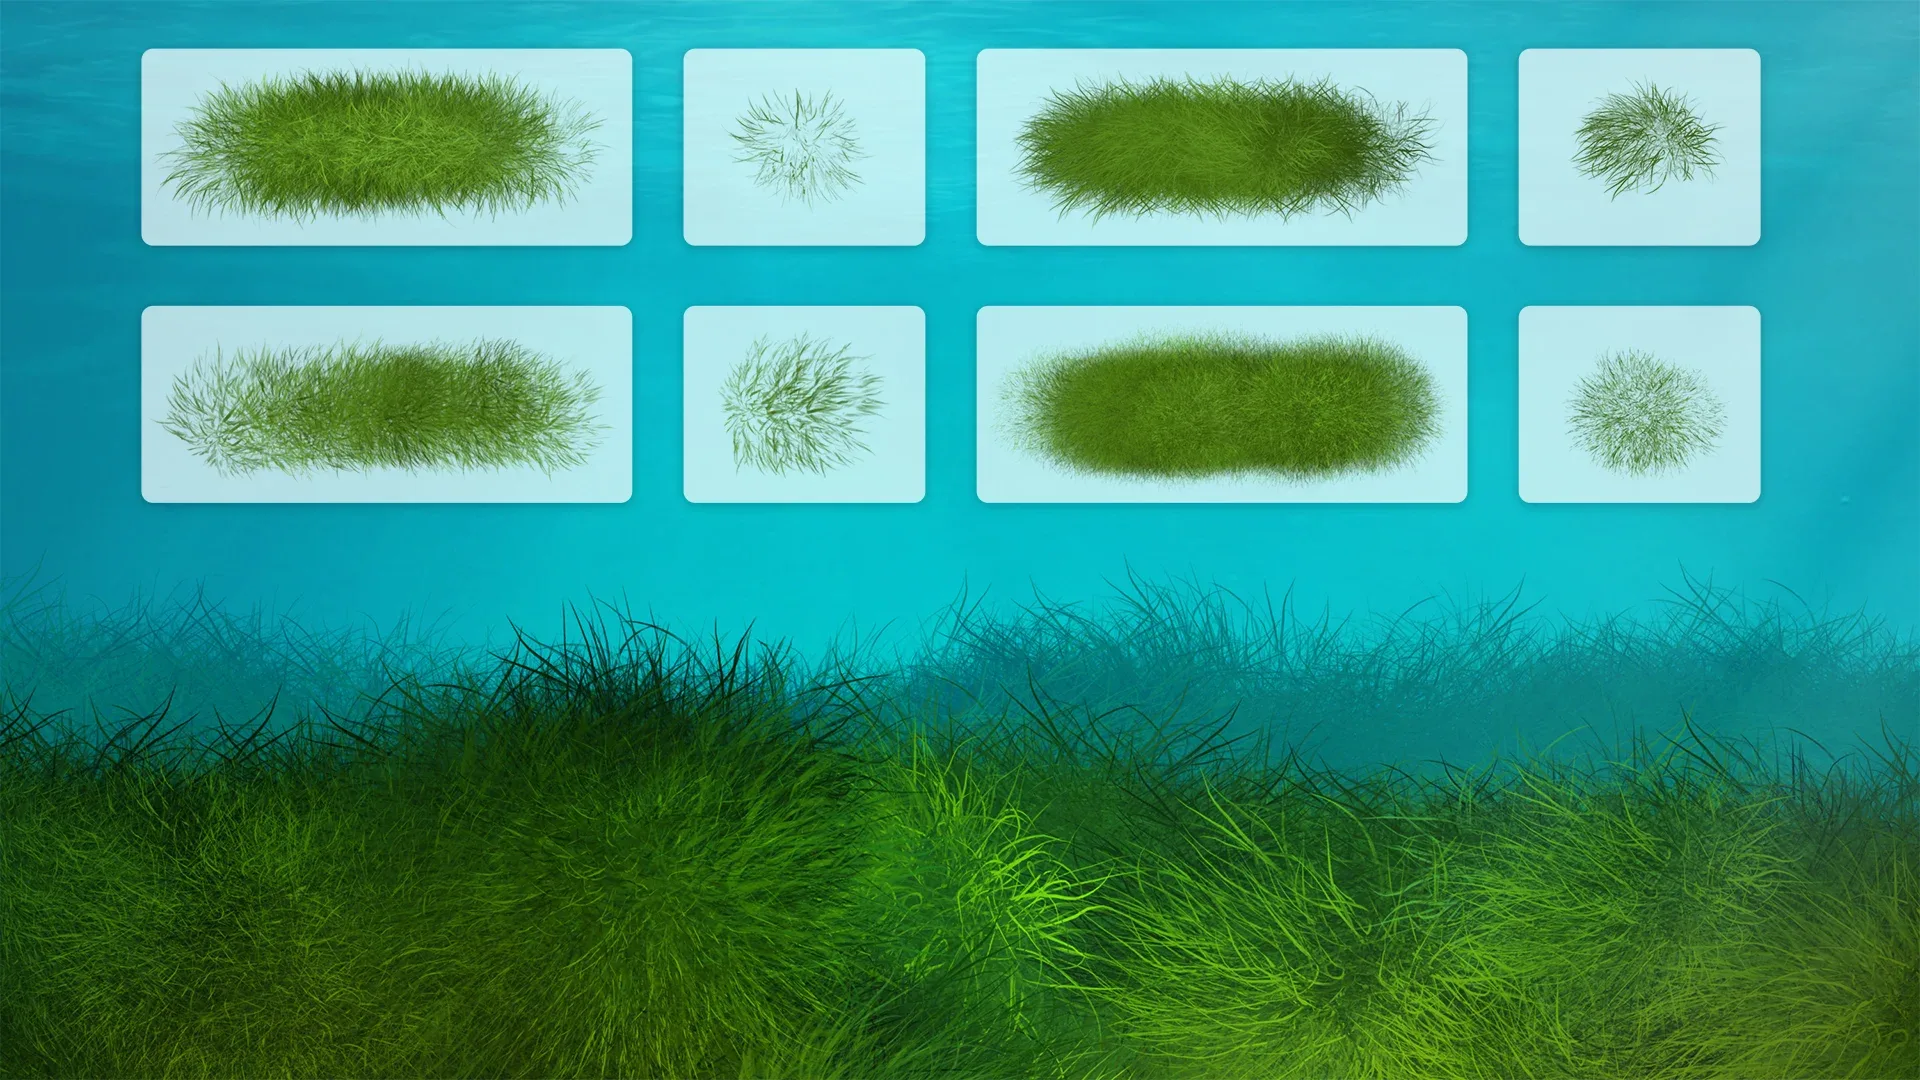 Seagrass Photoshop Brushes